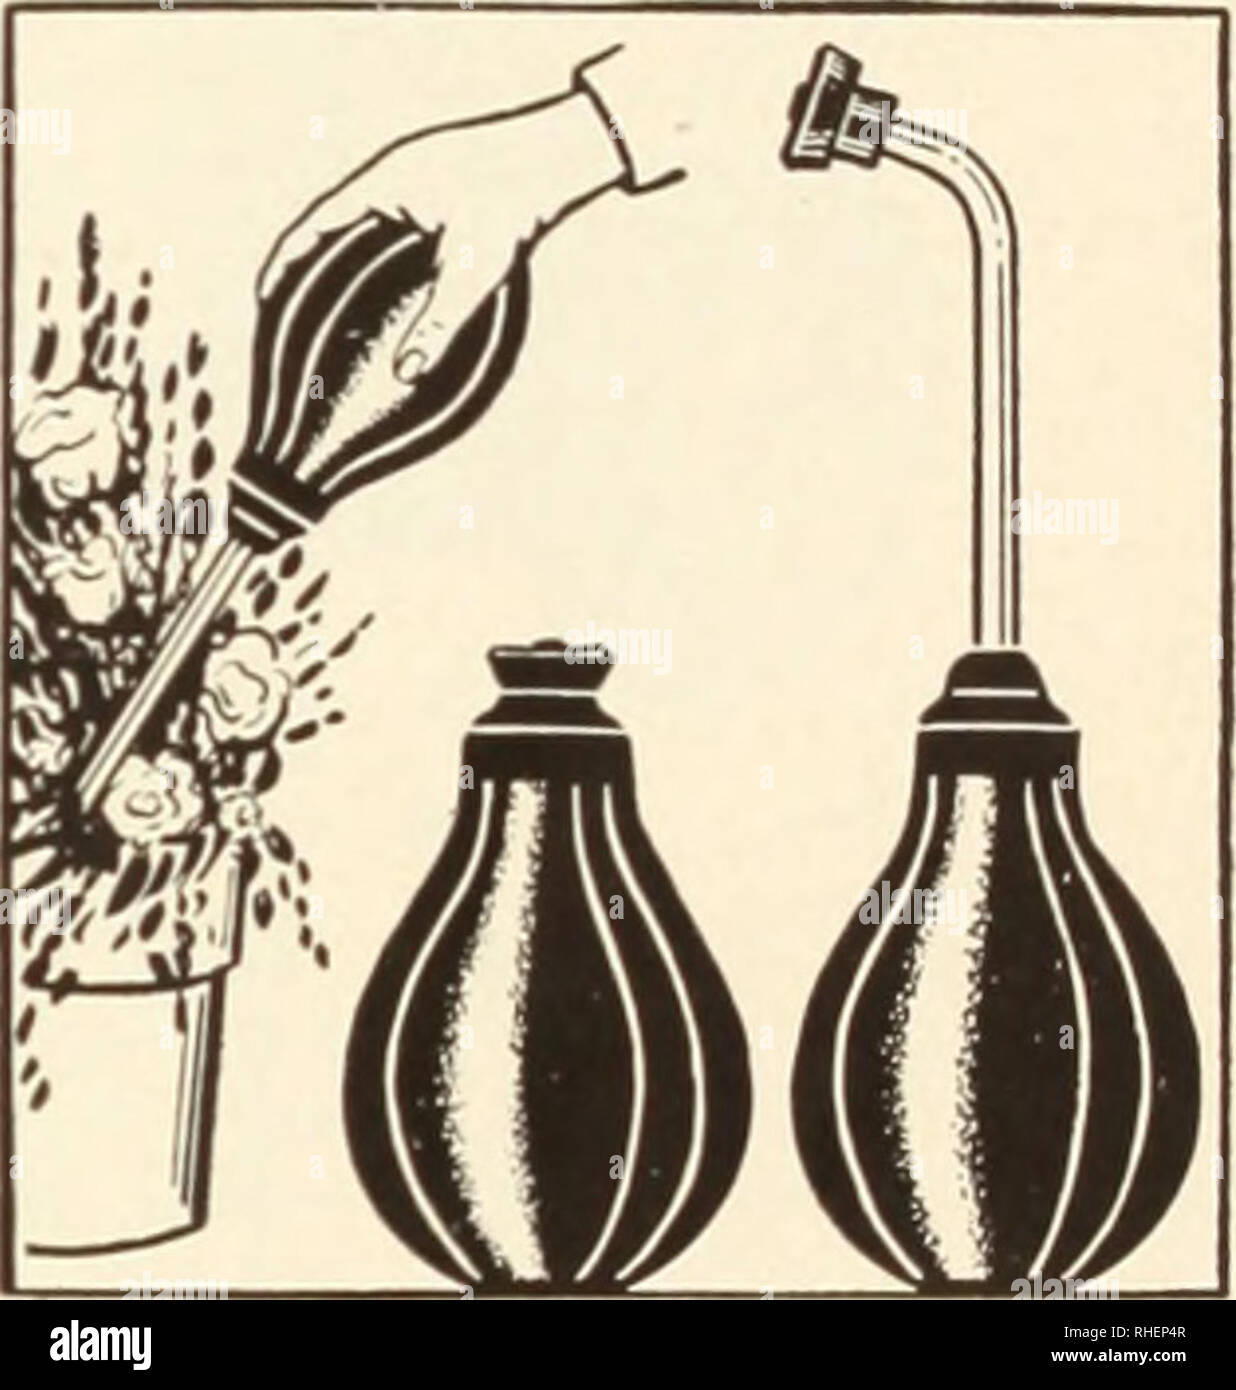 . Bolgiano's capitol city seeds : 1955. Nurseries (Horticulture) Catalogs; Bulbs (Plants) Catalogs; Vegetables Catalogs; Garden tools Catalogs; Seeds Catalogs. 20 ft ;1 95 I 40 ft S3 75 Resinite Flexible Twin Tube Sprinkler 25 ft S3 30 | 50 ft S4 95 I ike all-night rain. Water seeps through entire length. Puts water where you want it —at the roots. No run-off—No waste—No soil-washing No. 0. 12 ft.. $1 80 | No. 2. 30 ft.. .$3 70 No. 1. 18 ft... 2 40 I No. 3. 50 ft... 6 00 Sprabulb and Centrospray. For years florists, seedsmen and house- wives throughout the U. S. A. have found the handy Sprabul Stock Photo